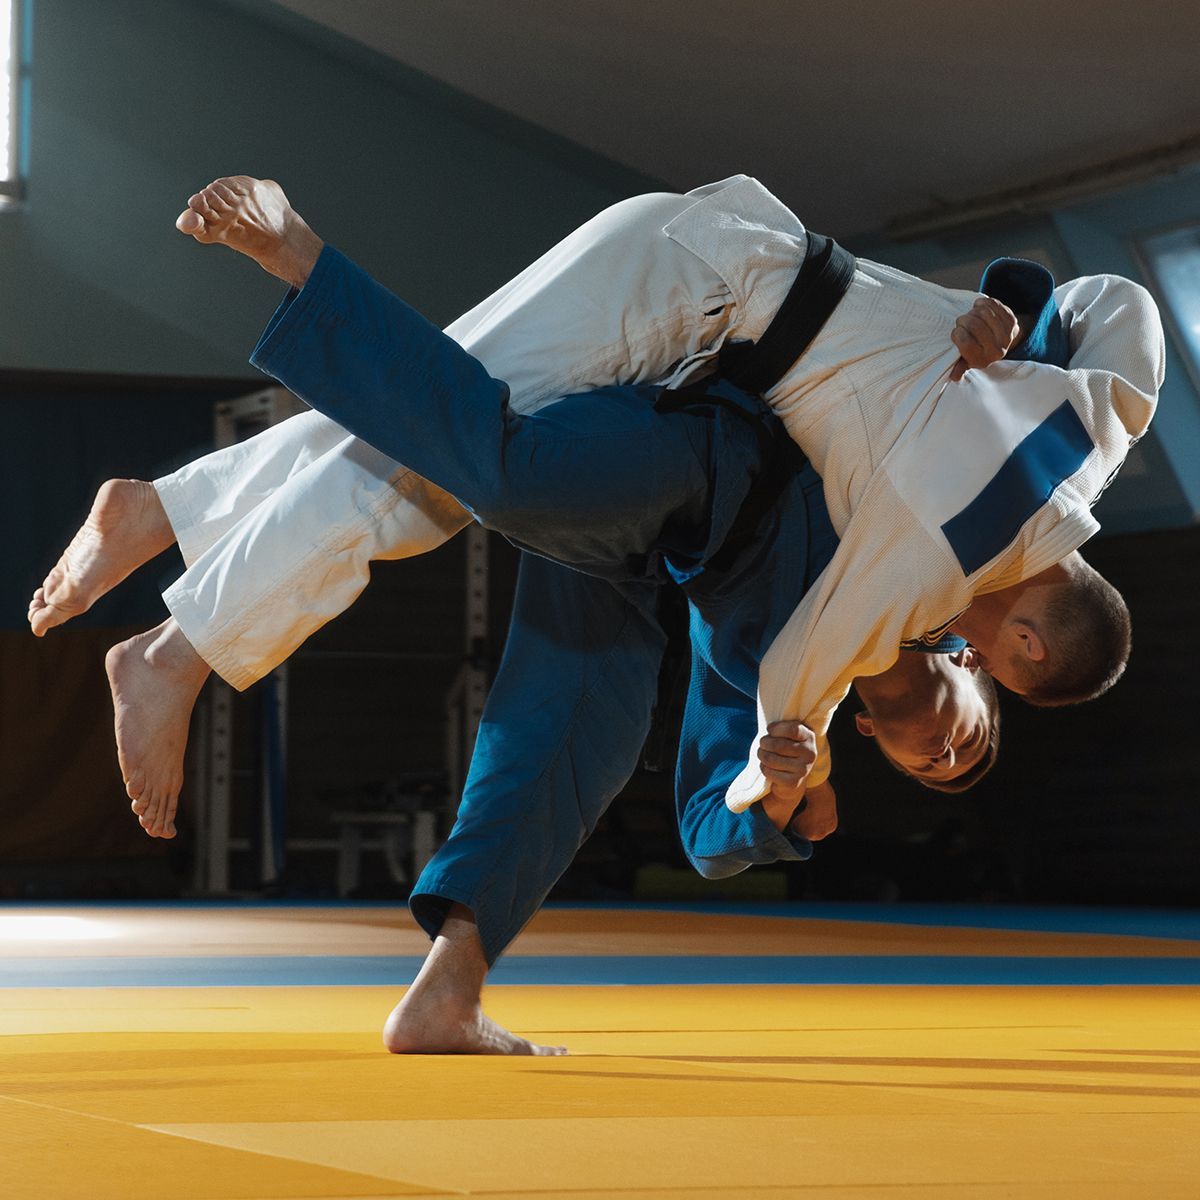 two men are wrestling on a mat in a gym